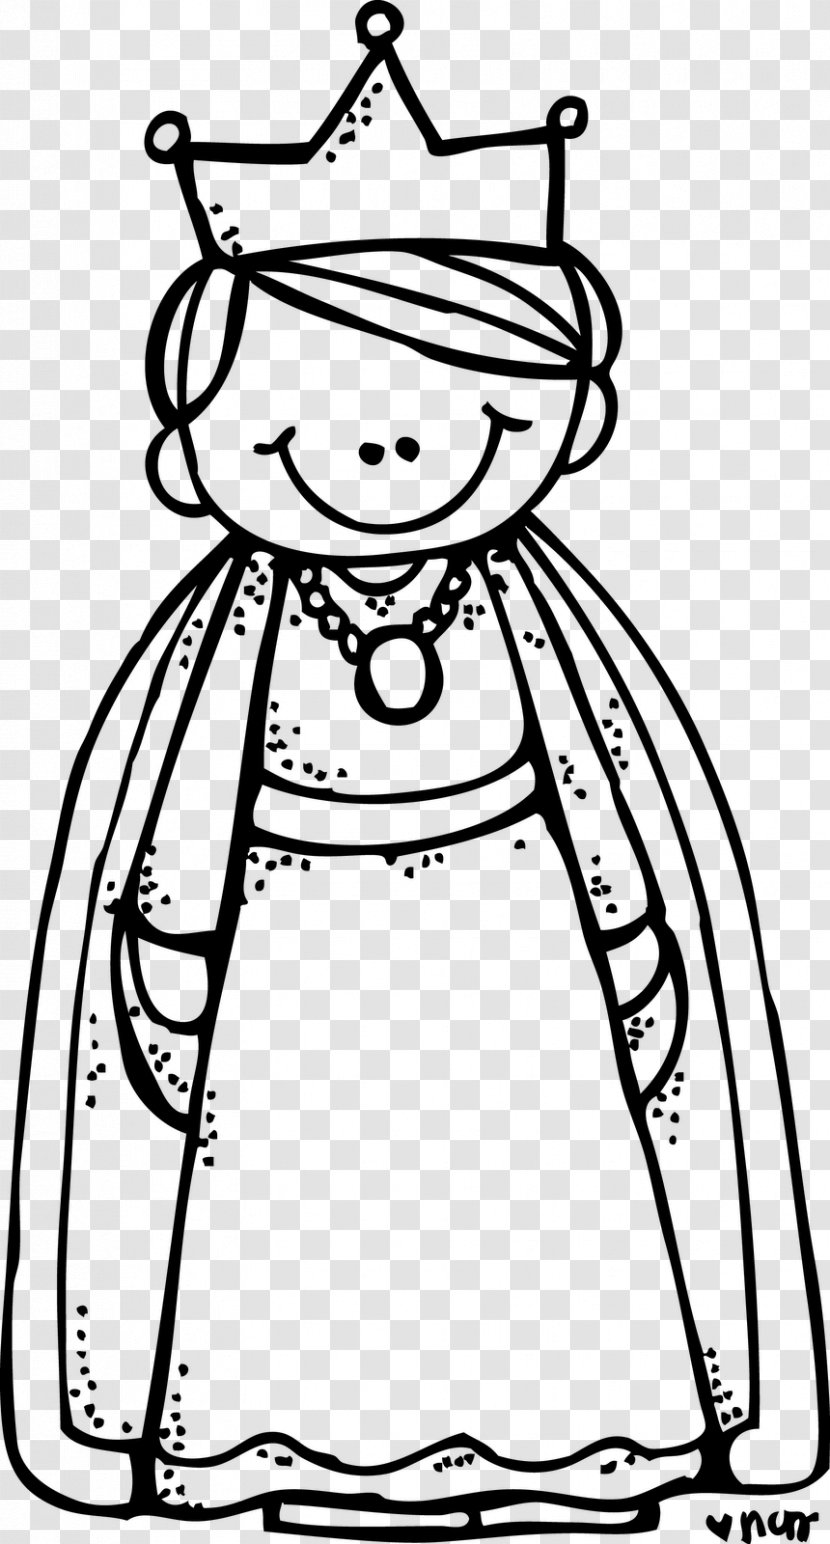 Drawing Clip Art - Black And White - Queen Clipart Transparent PNG